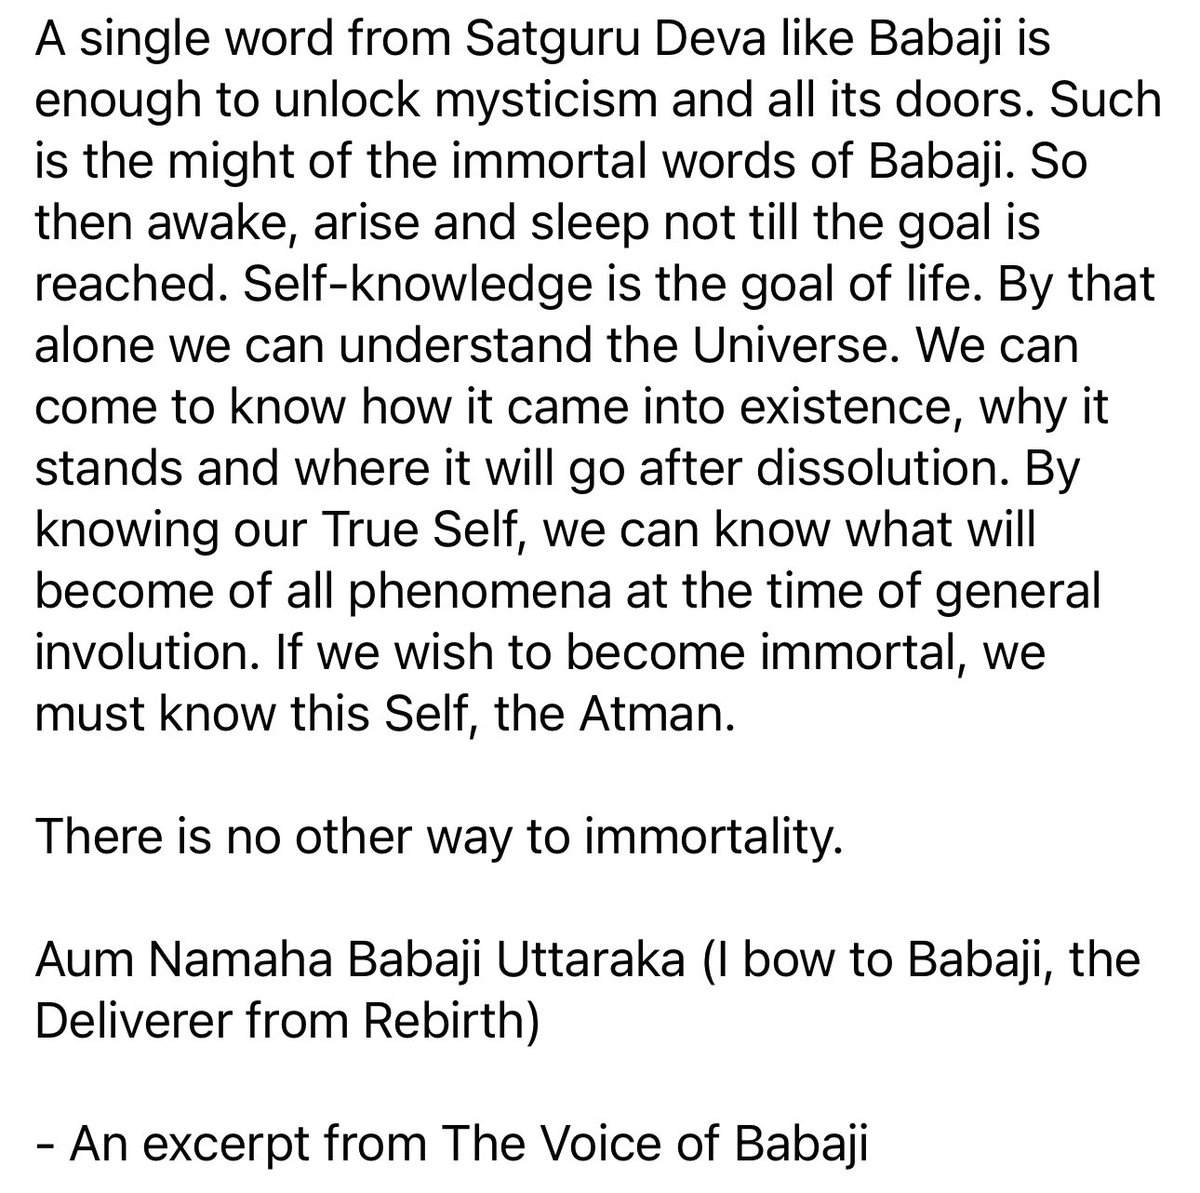 Self-knowledge is the goal of life. By knowing our True Self, we can know what will become of all phenomena at the time of general involution. If we wish to become immortal, we must know this Self, the Atman.
There is no other way to immortality.
Aum Namaha Babaji Uttaraka!